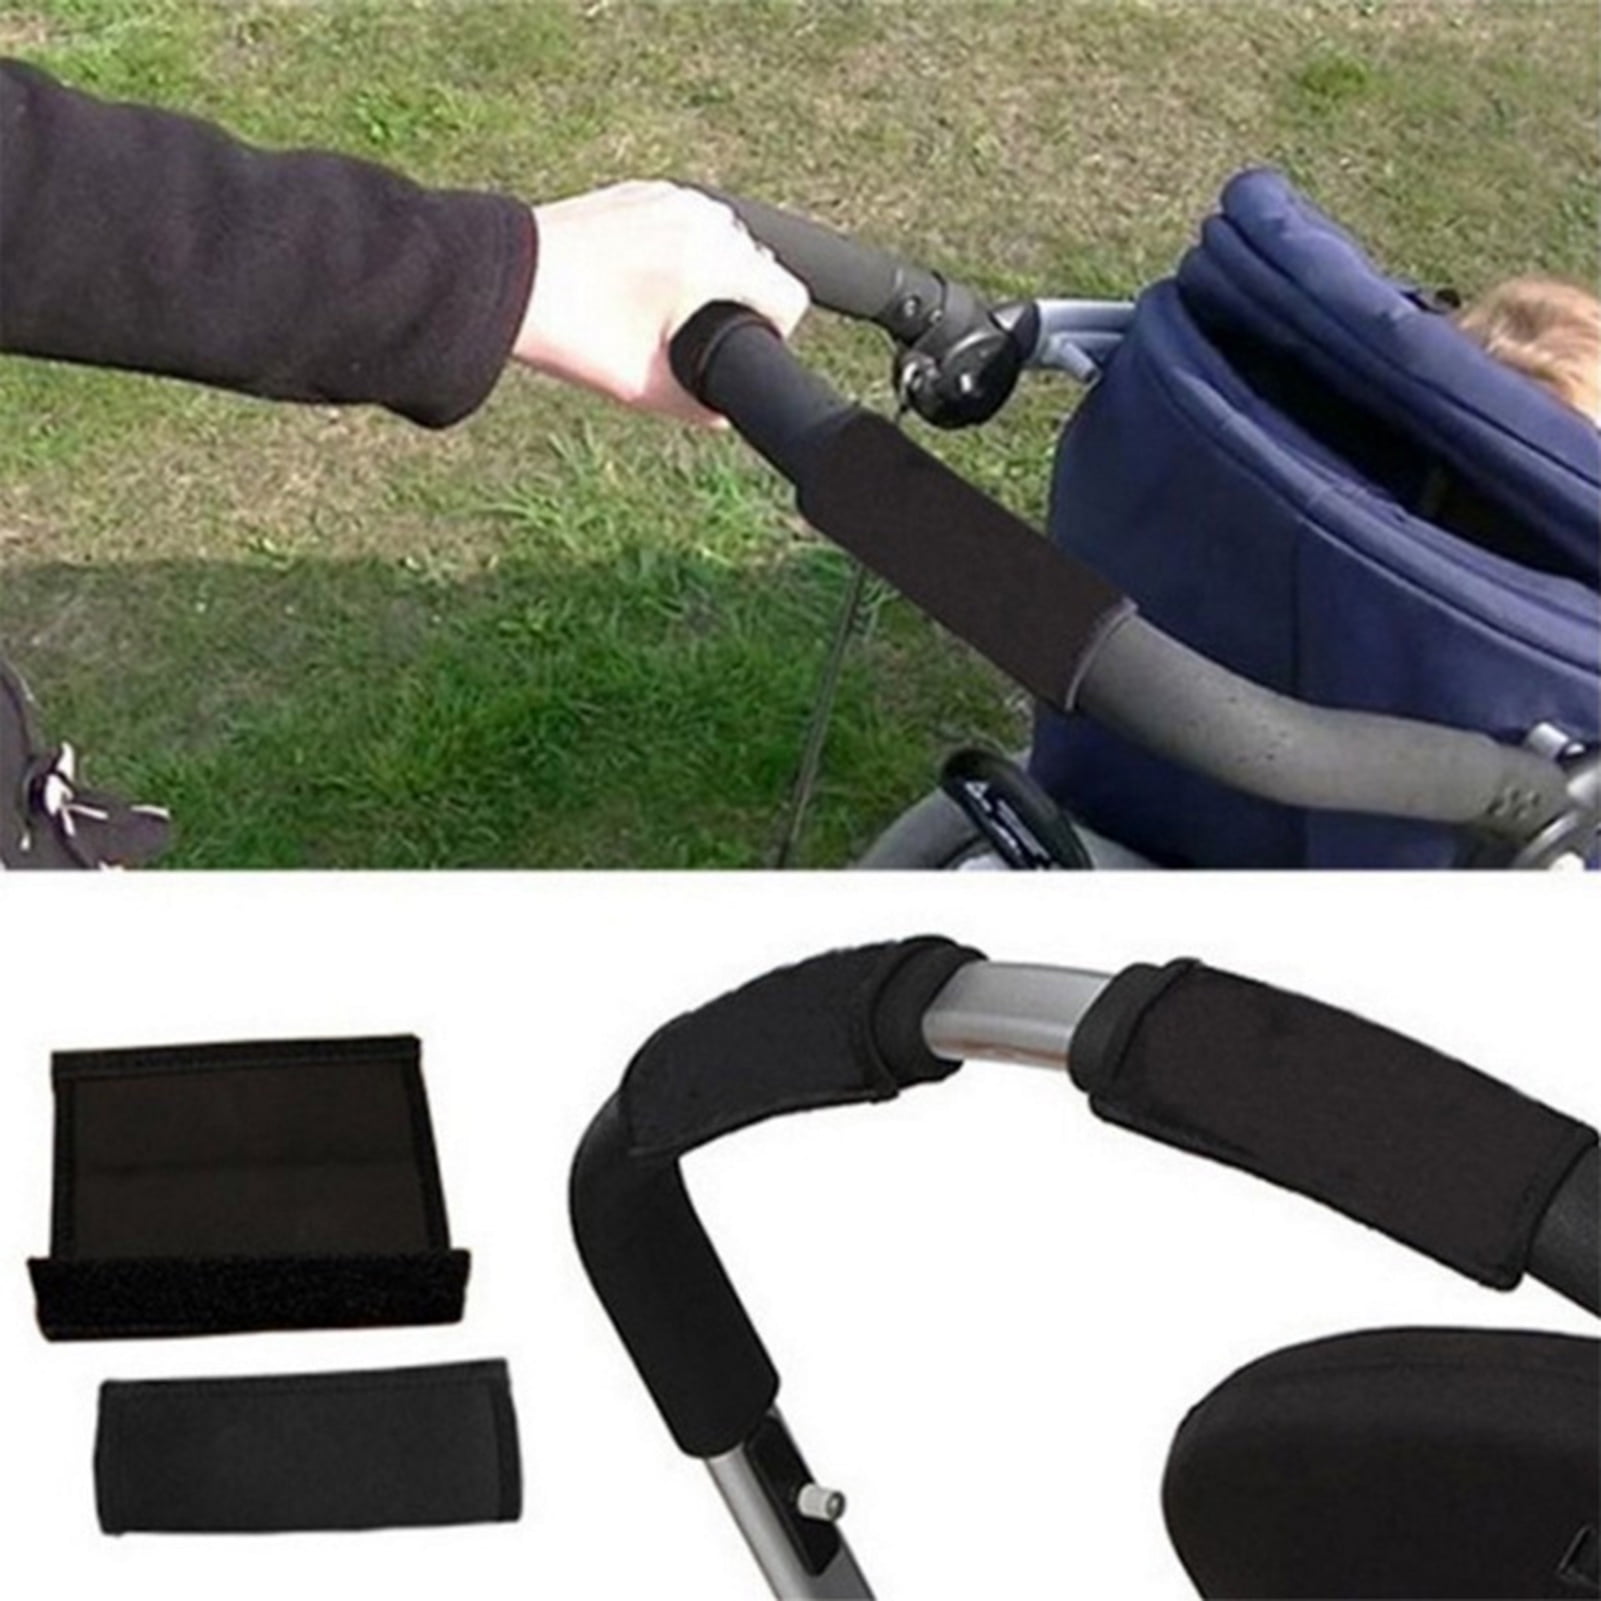 Portable PU Anti-slip Handle Bar Cover for Baby Pushchairs/Prams/Stroller 